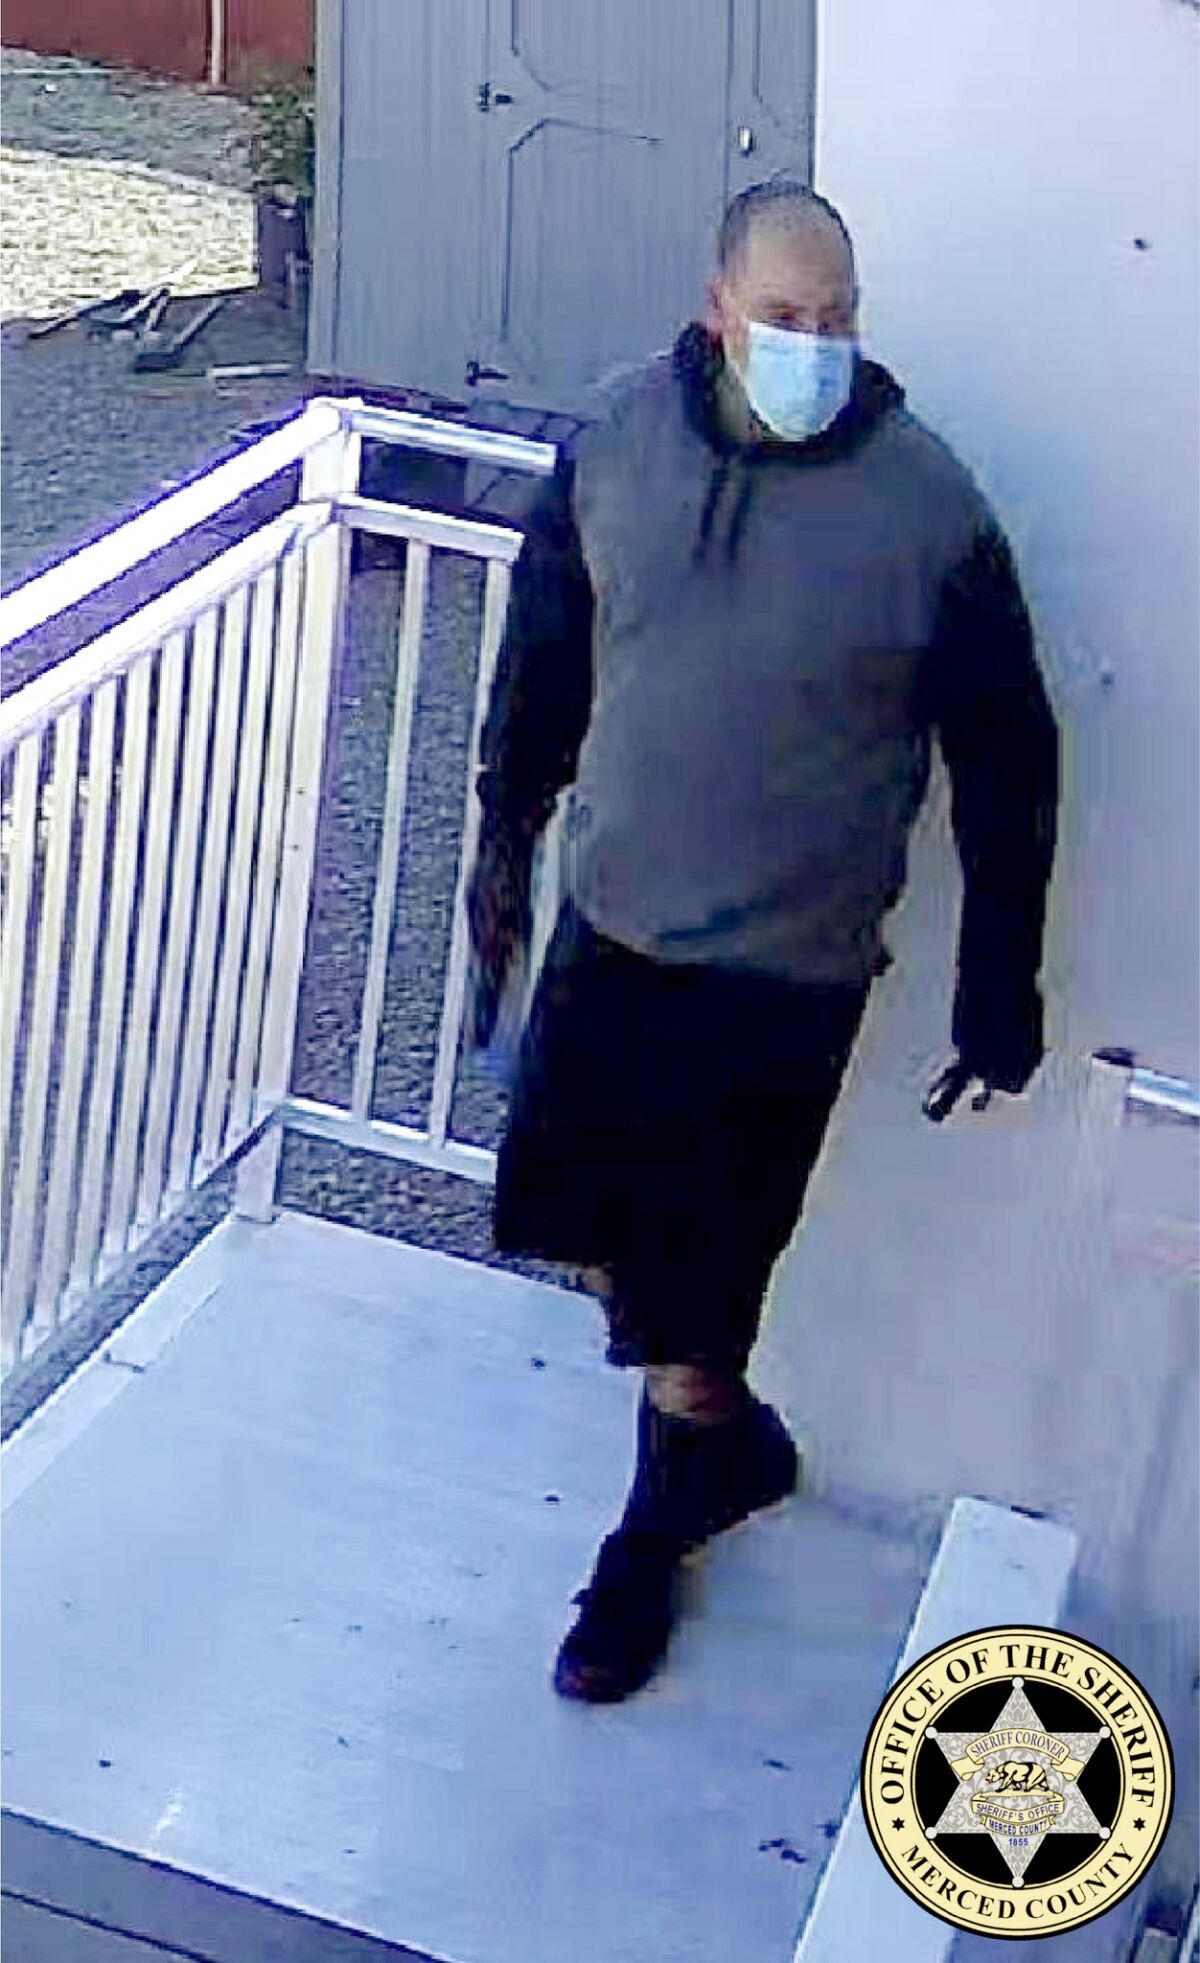 Photo provided by the Merced County Sheriff's office shows surveillance footage of a man in a face mask.